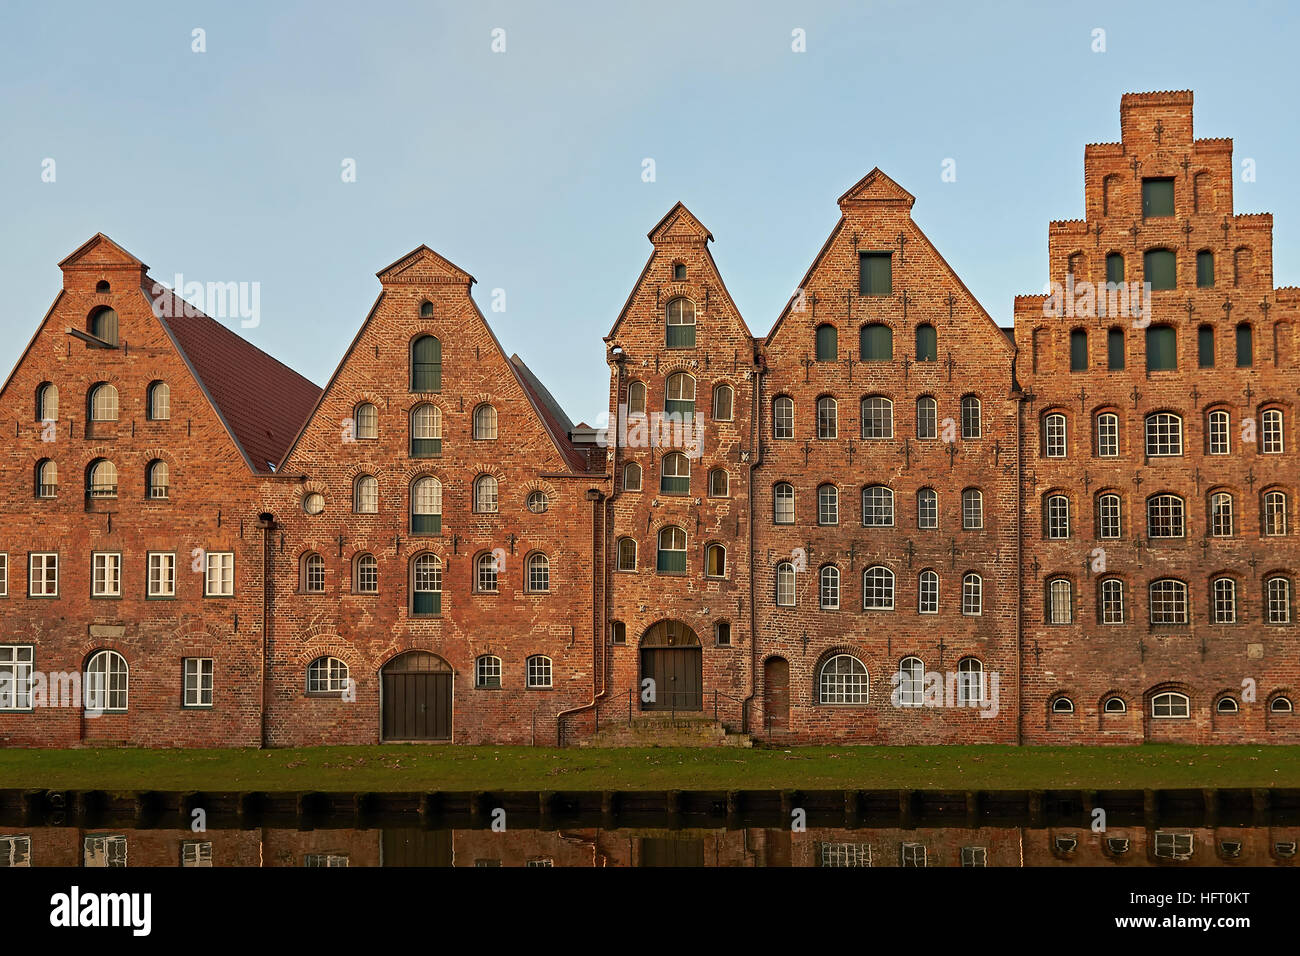 The Salzspeicher of Lübeck, Germany in the warm light of sunrise Stock Photo